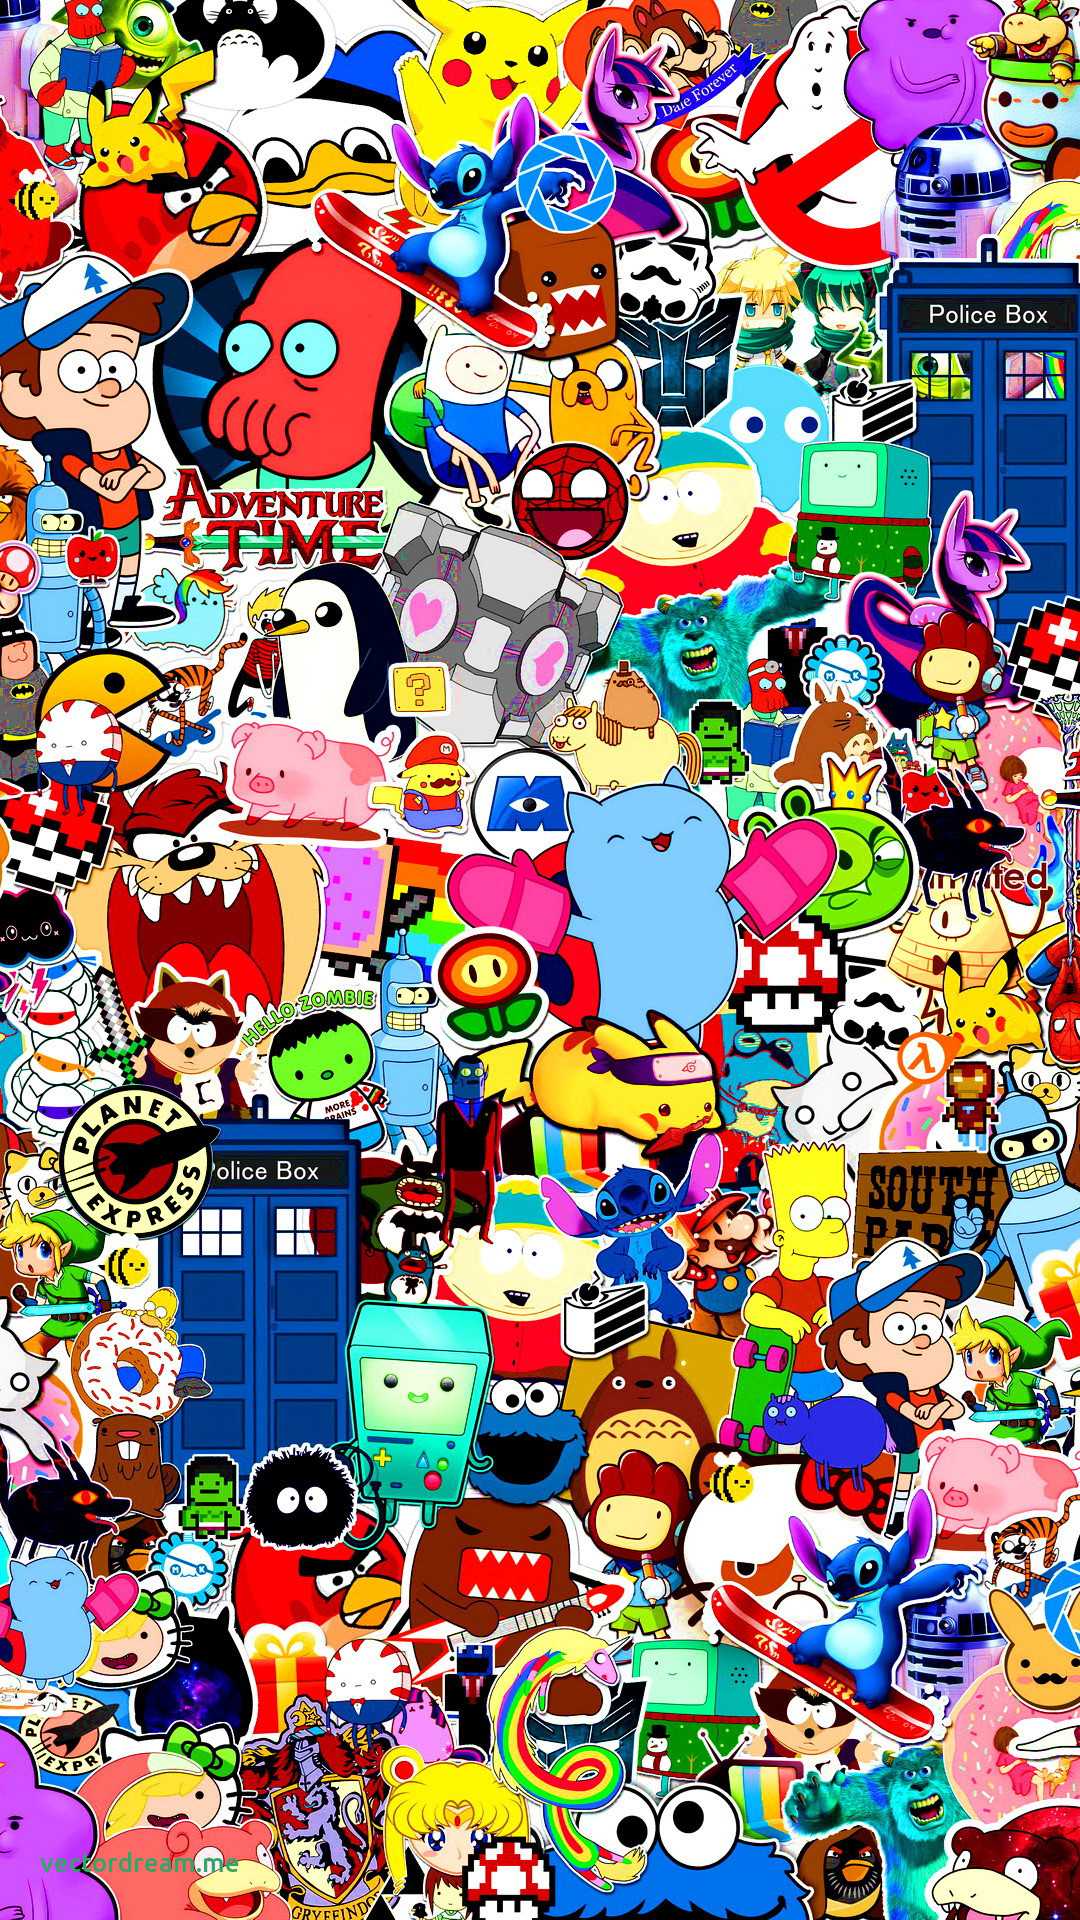 Cartoon Characters Iphone Wallpapers